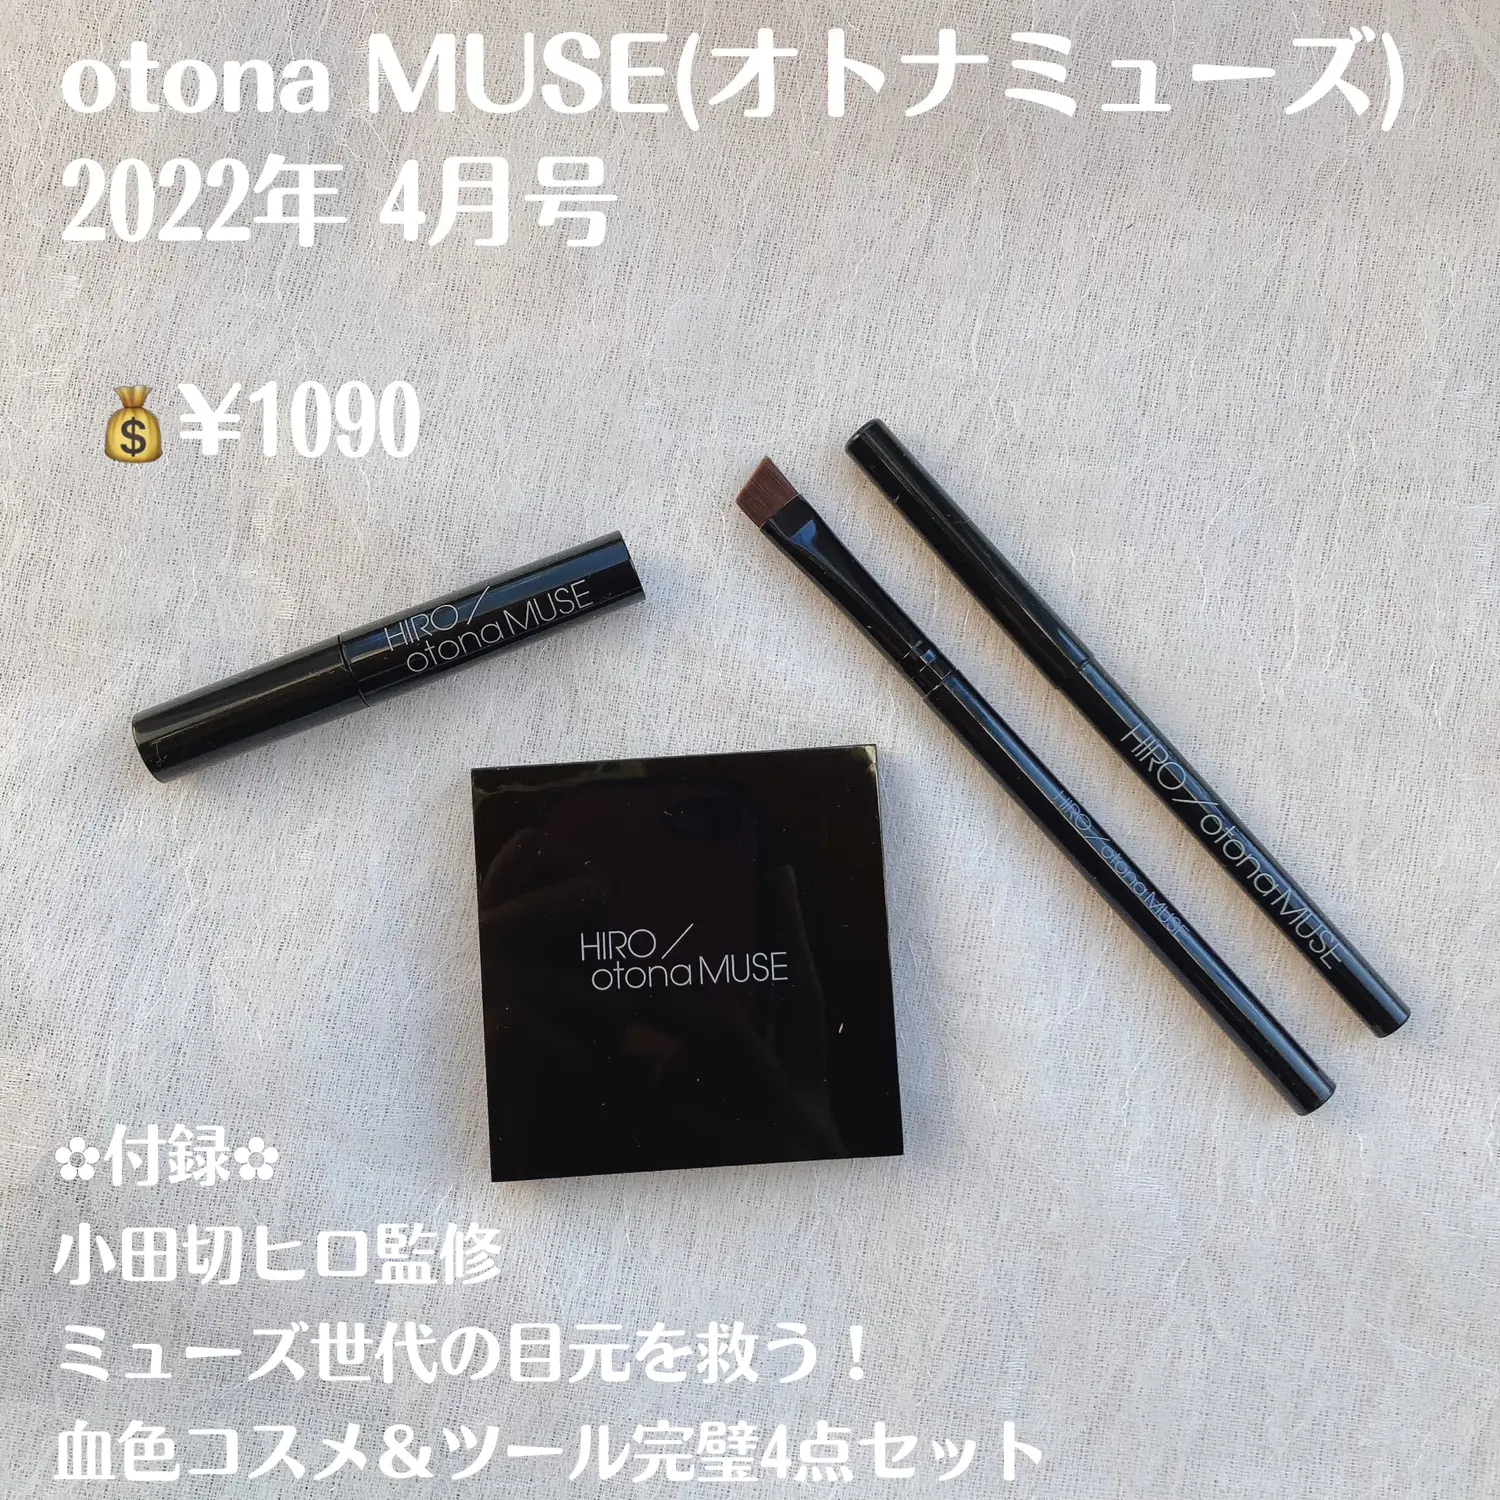 1090 yen in all!? Super high quality cosmetics supplement✨, Gallery posted  by ねるこ